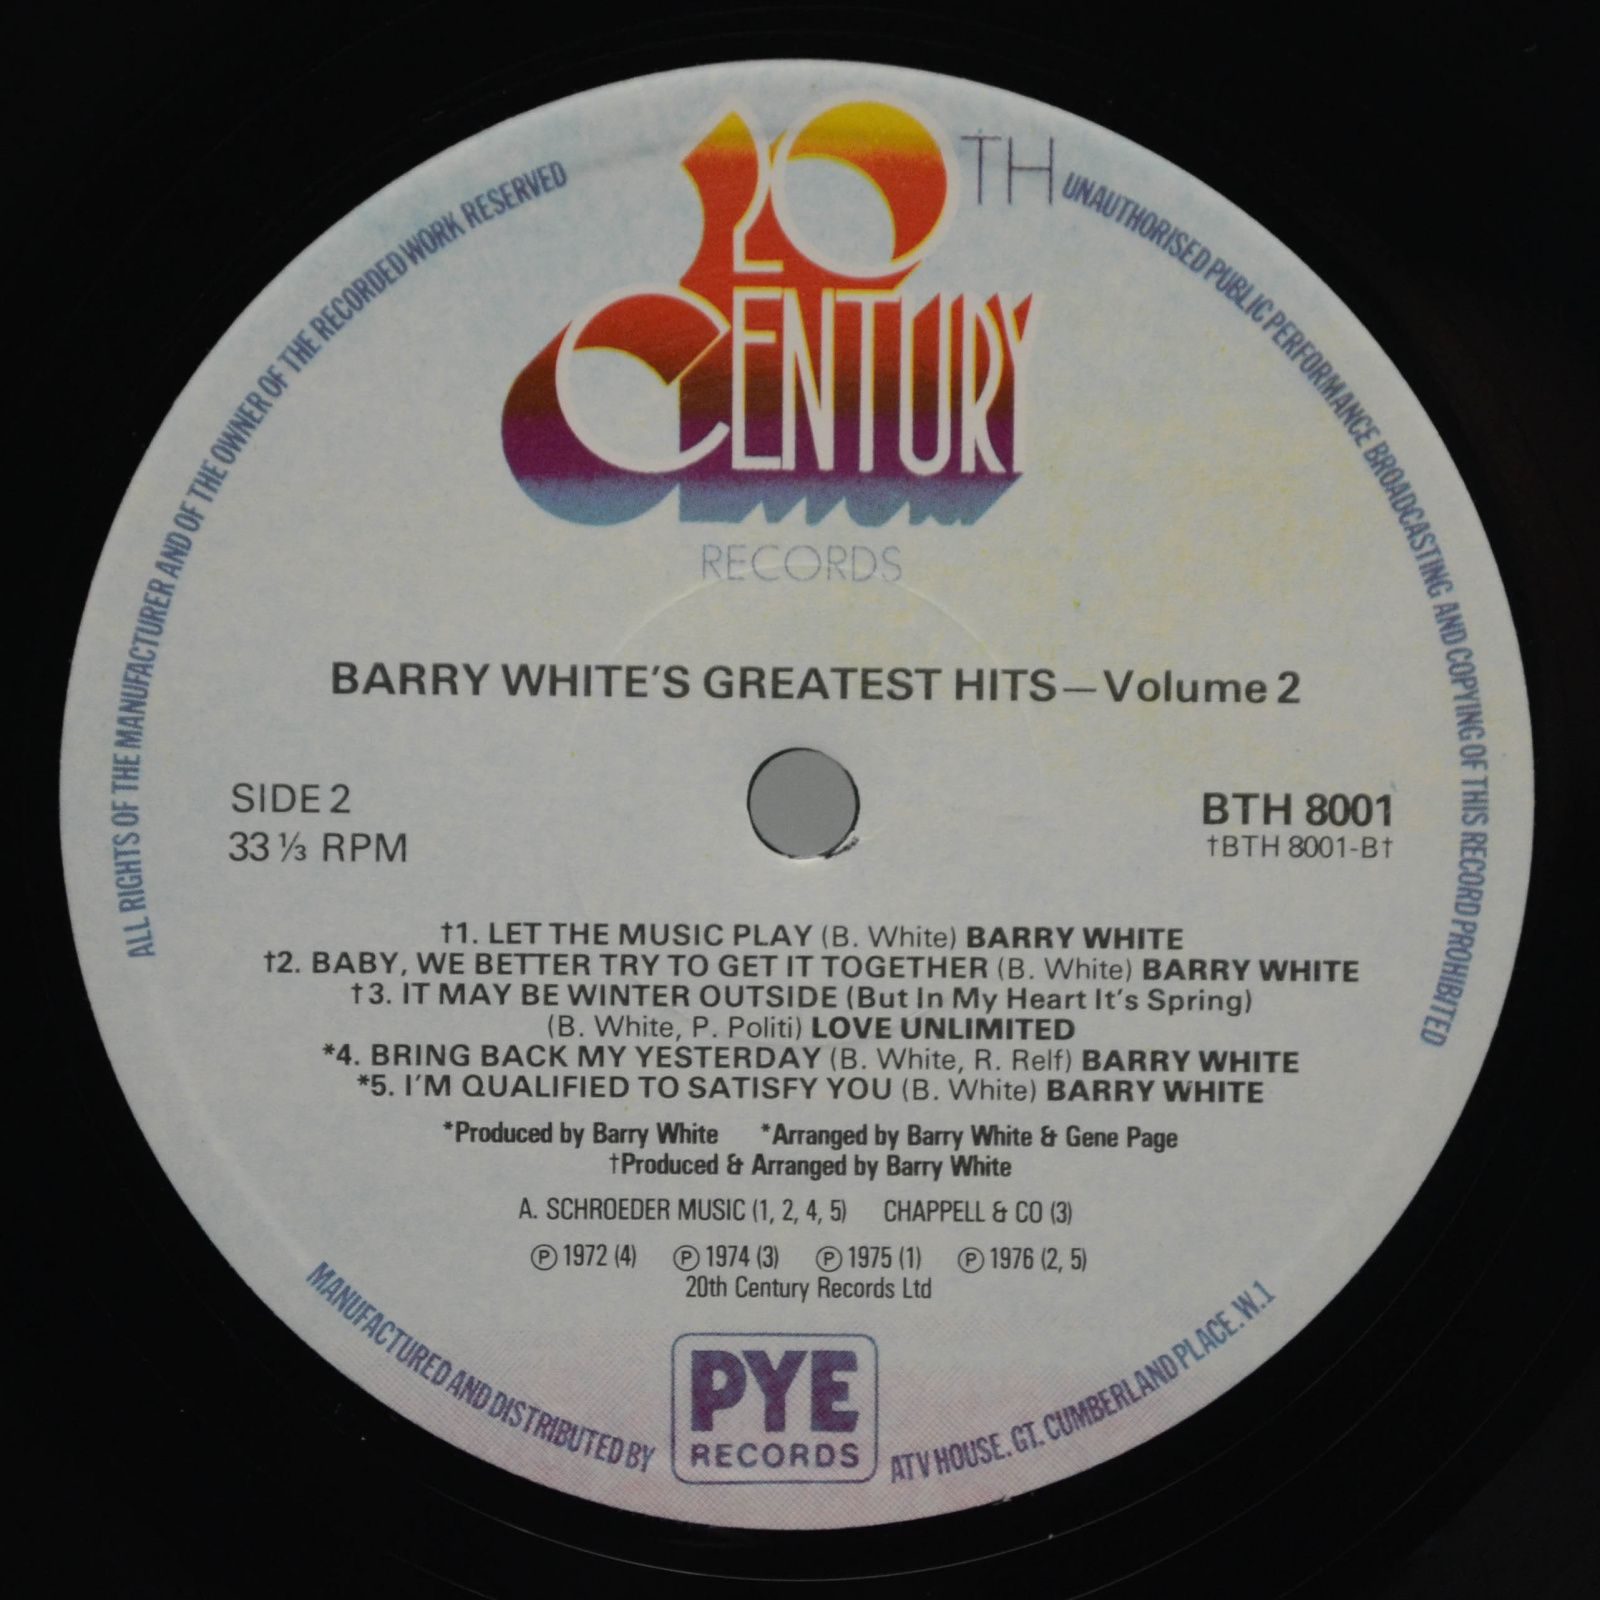 Barry White — Greatest Hits Volume Two (UK), 1977